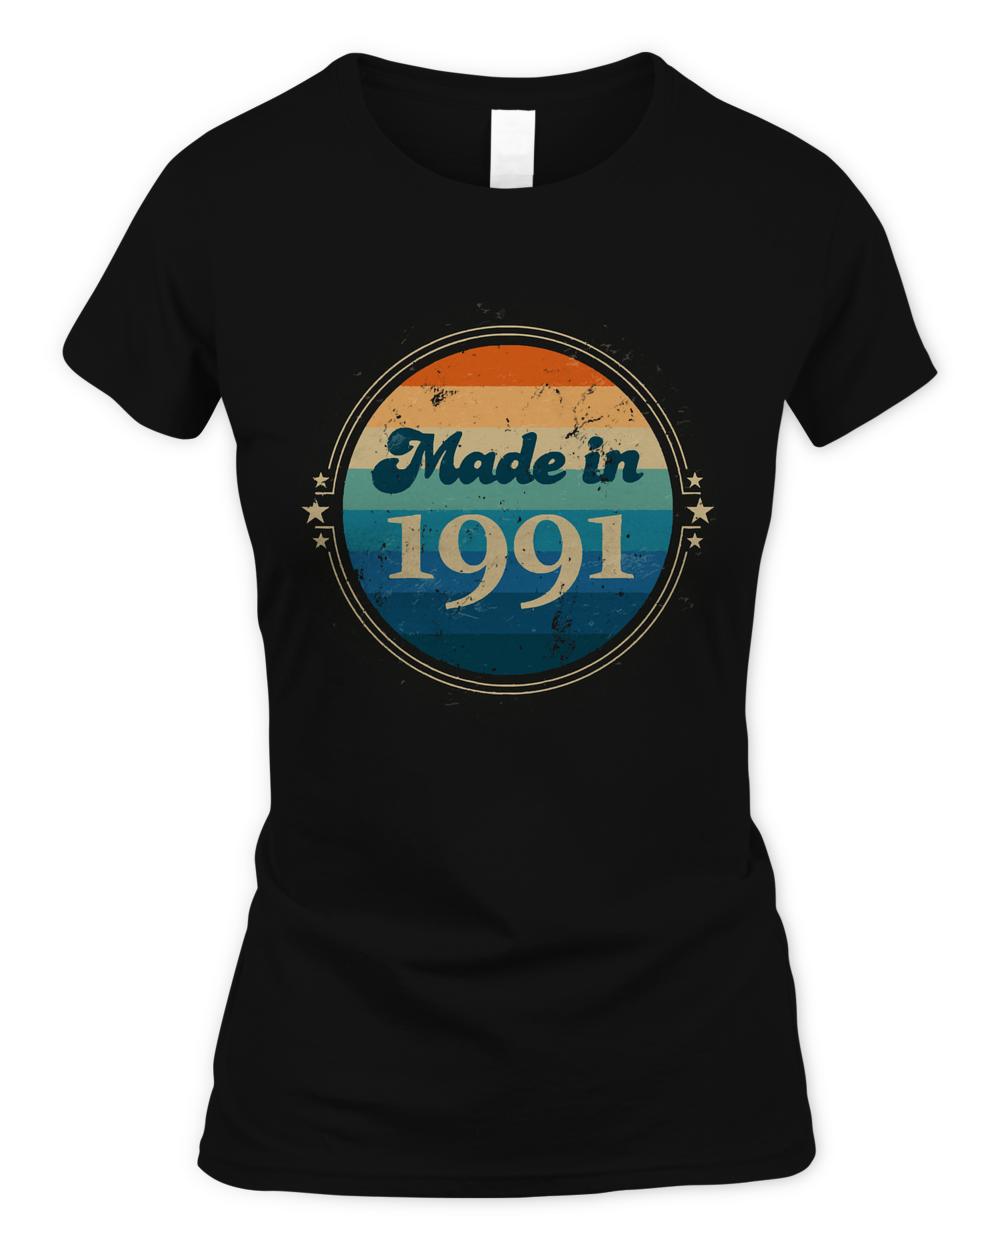 1991 T- Shirt Retro Vintage Made In 1991 T- Shirt